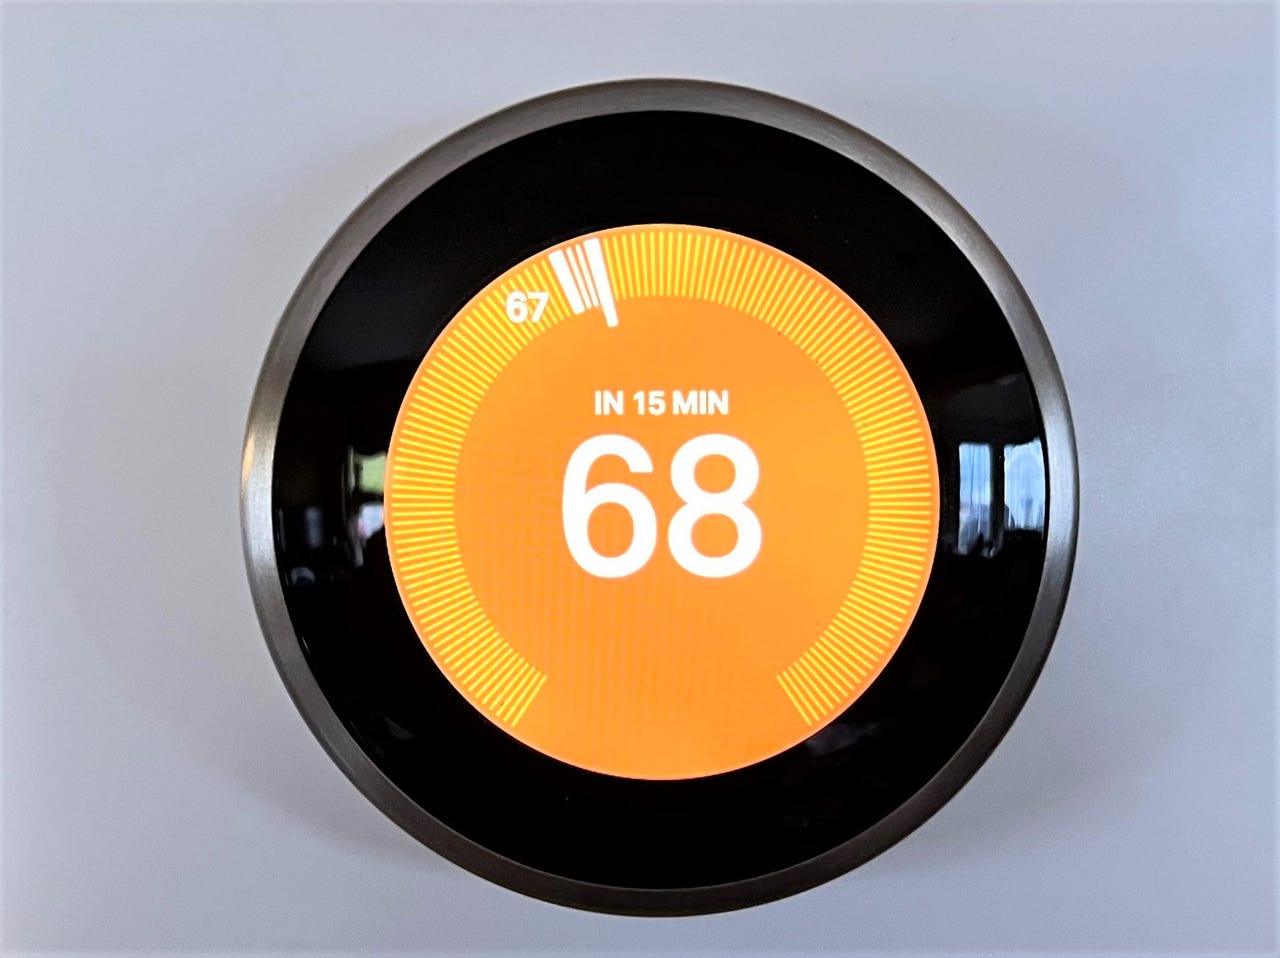 Google Nest Learning Thermostat review: Can new tech work in an